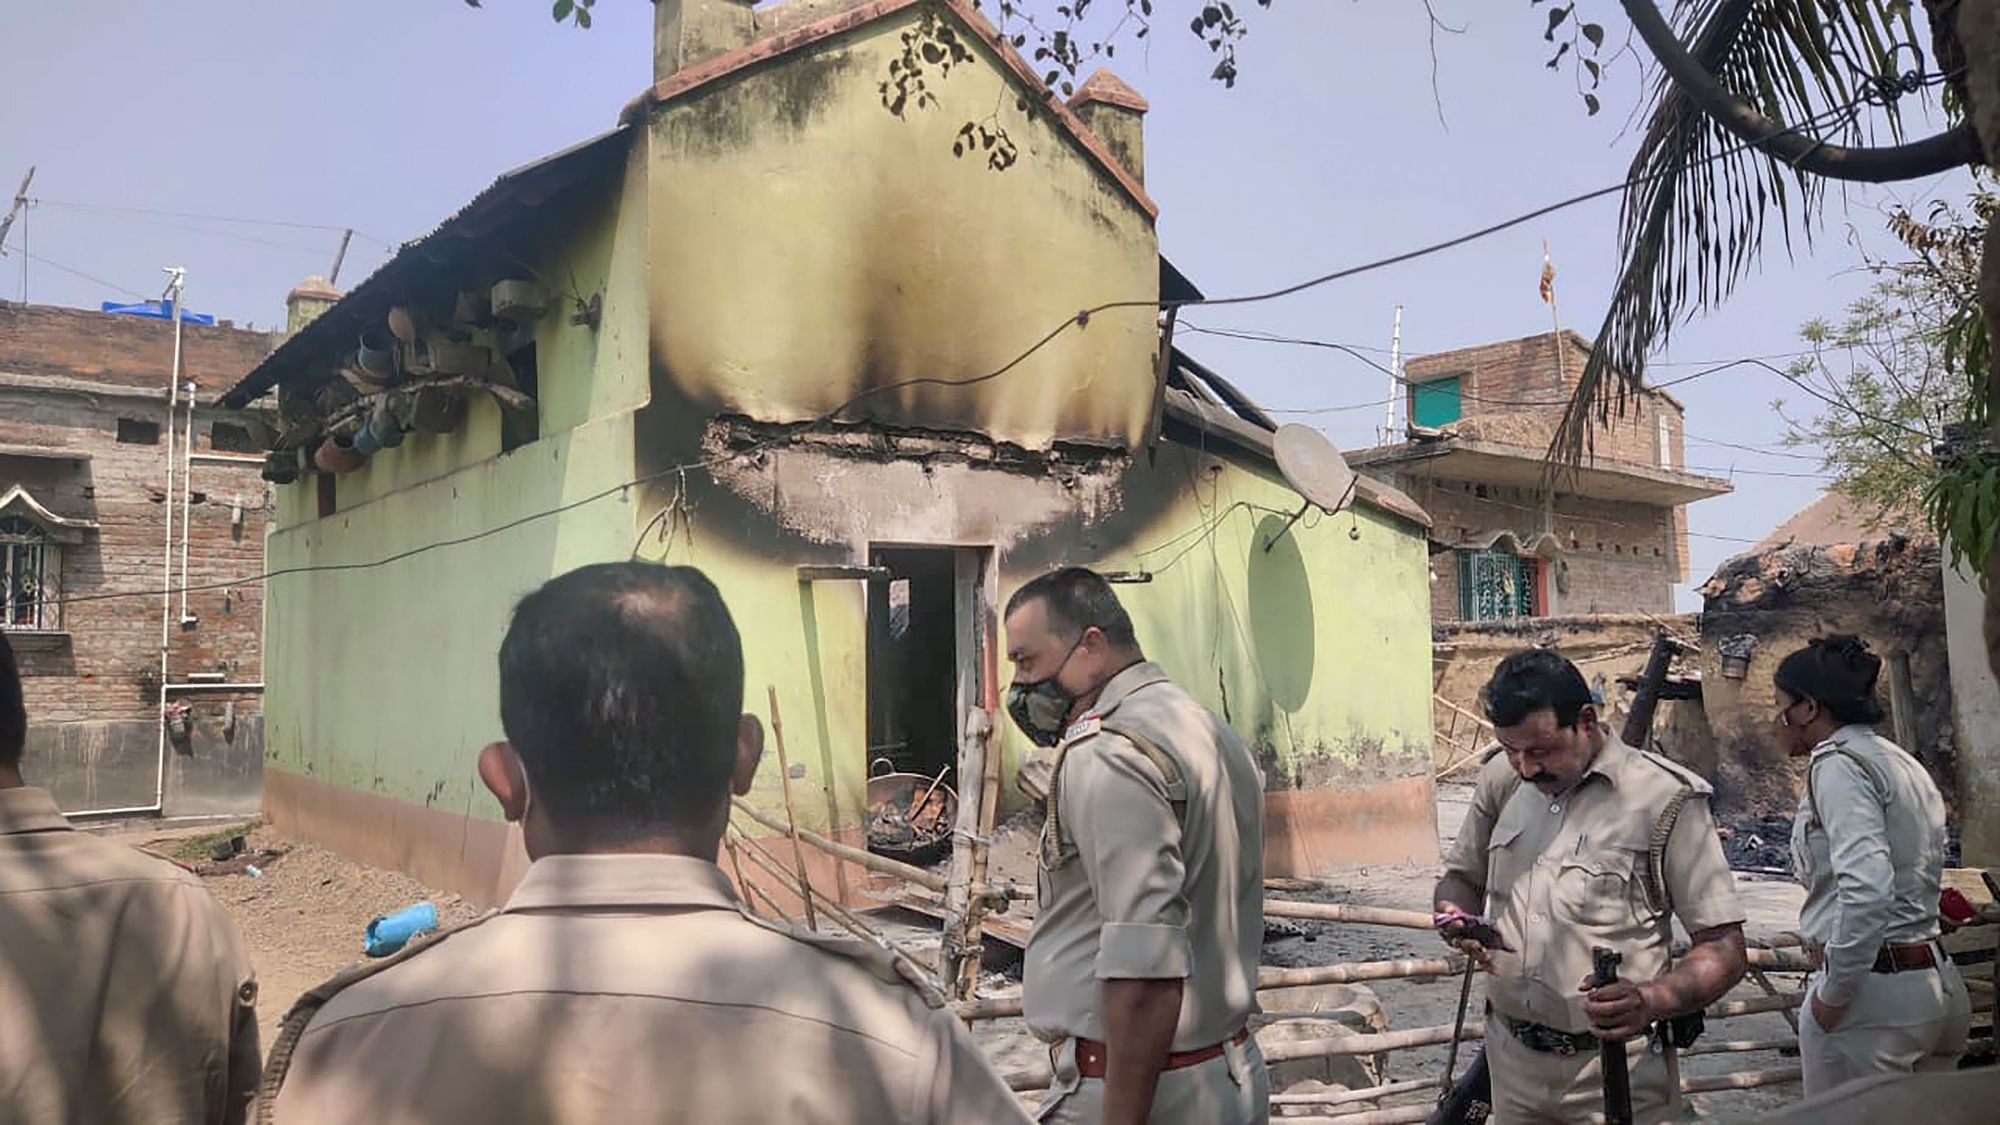 <div class="paragraphs"><p>The charred bodies of eight people were recovered from Rampurhat in <a href="https://www.thequint.com/news/india/bodies-found-burnt-houses-protests-birbhum-west-bengal">Birbhum</a> district after nearly 10-12 houses were set ablaze, the police said.</p></div>